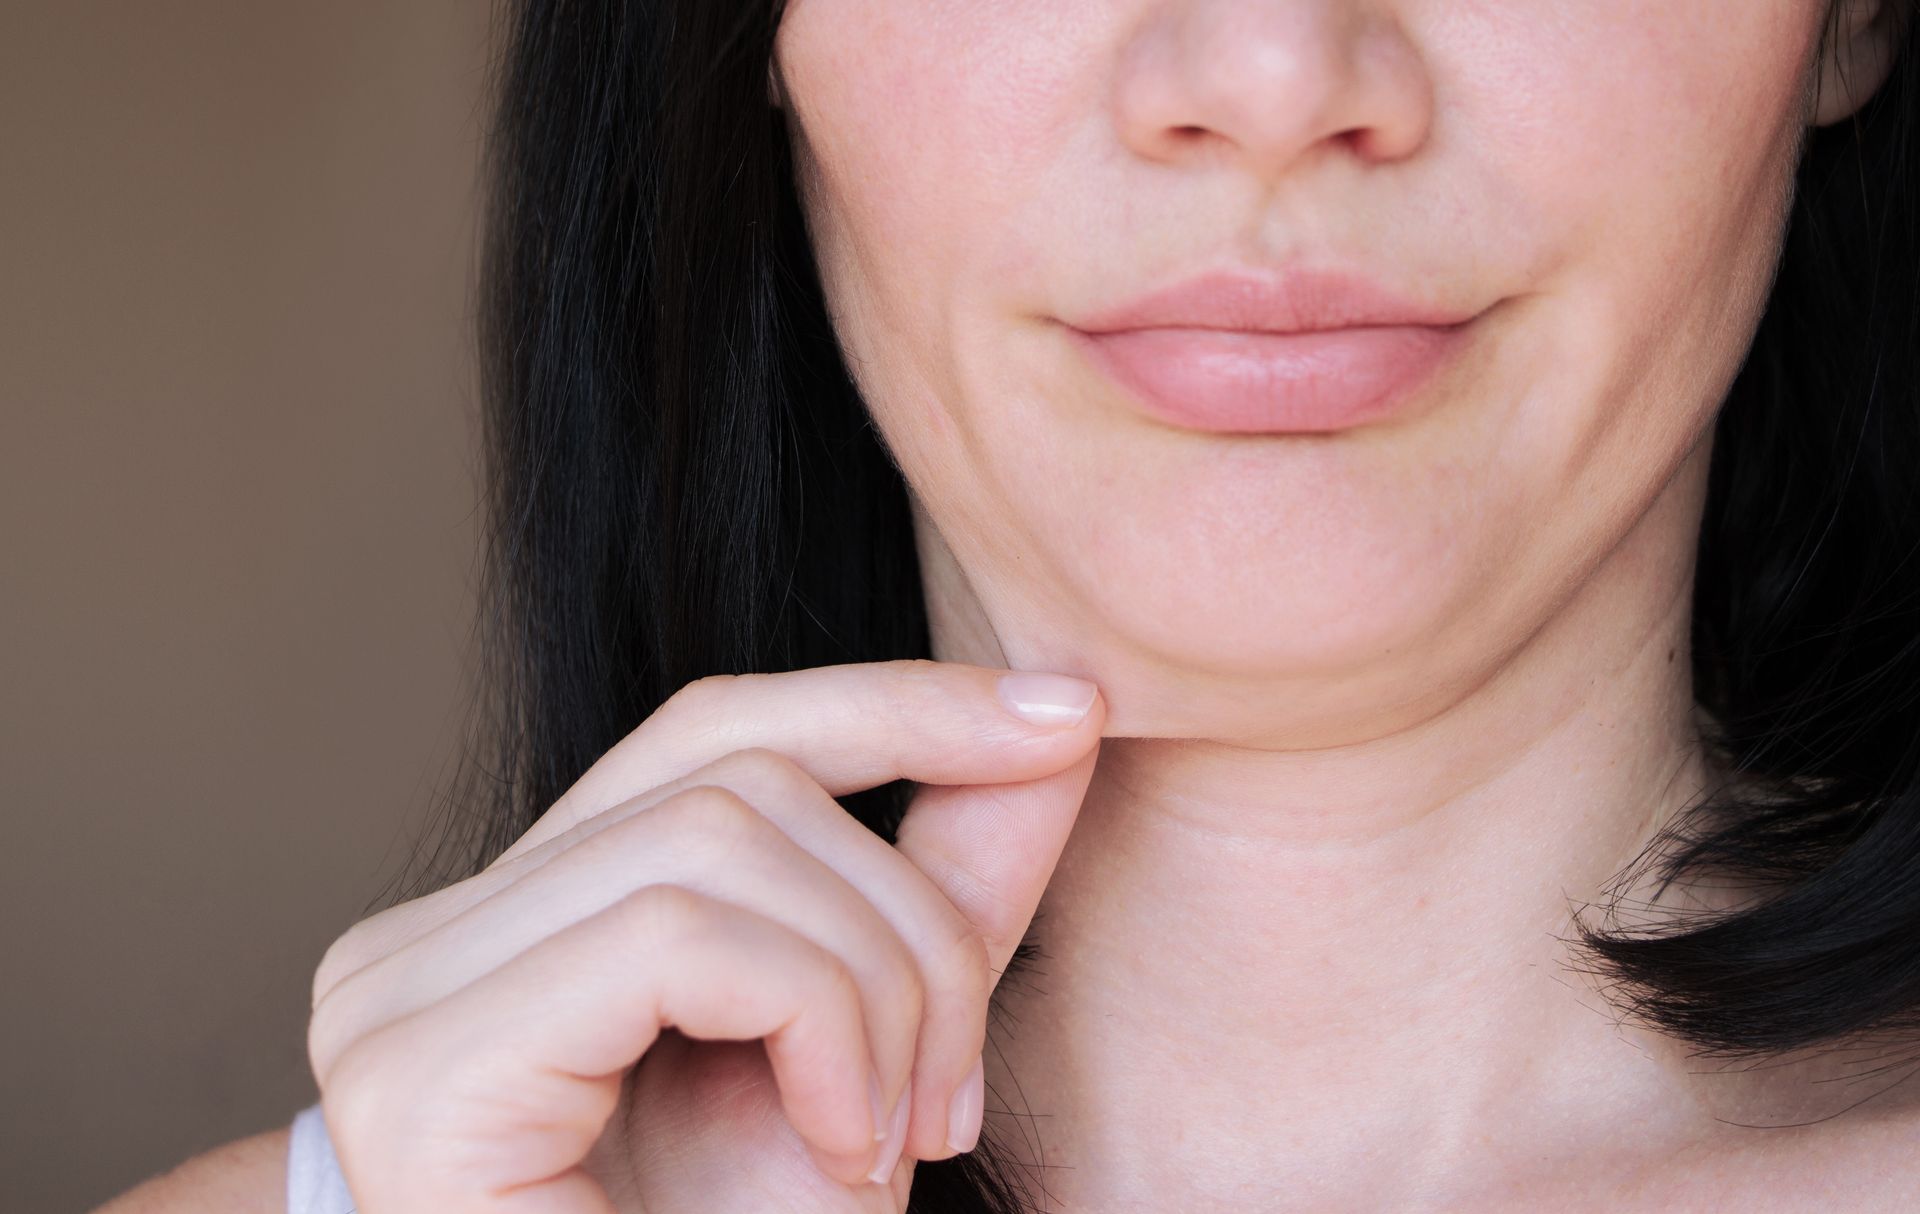 A woman is holding her chin with her hand.